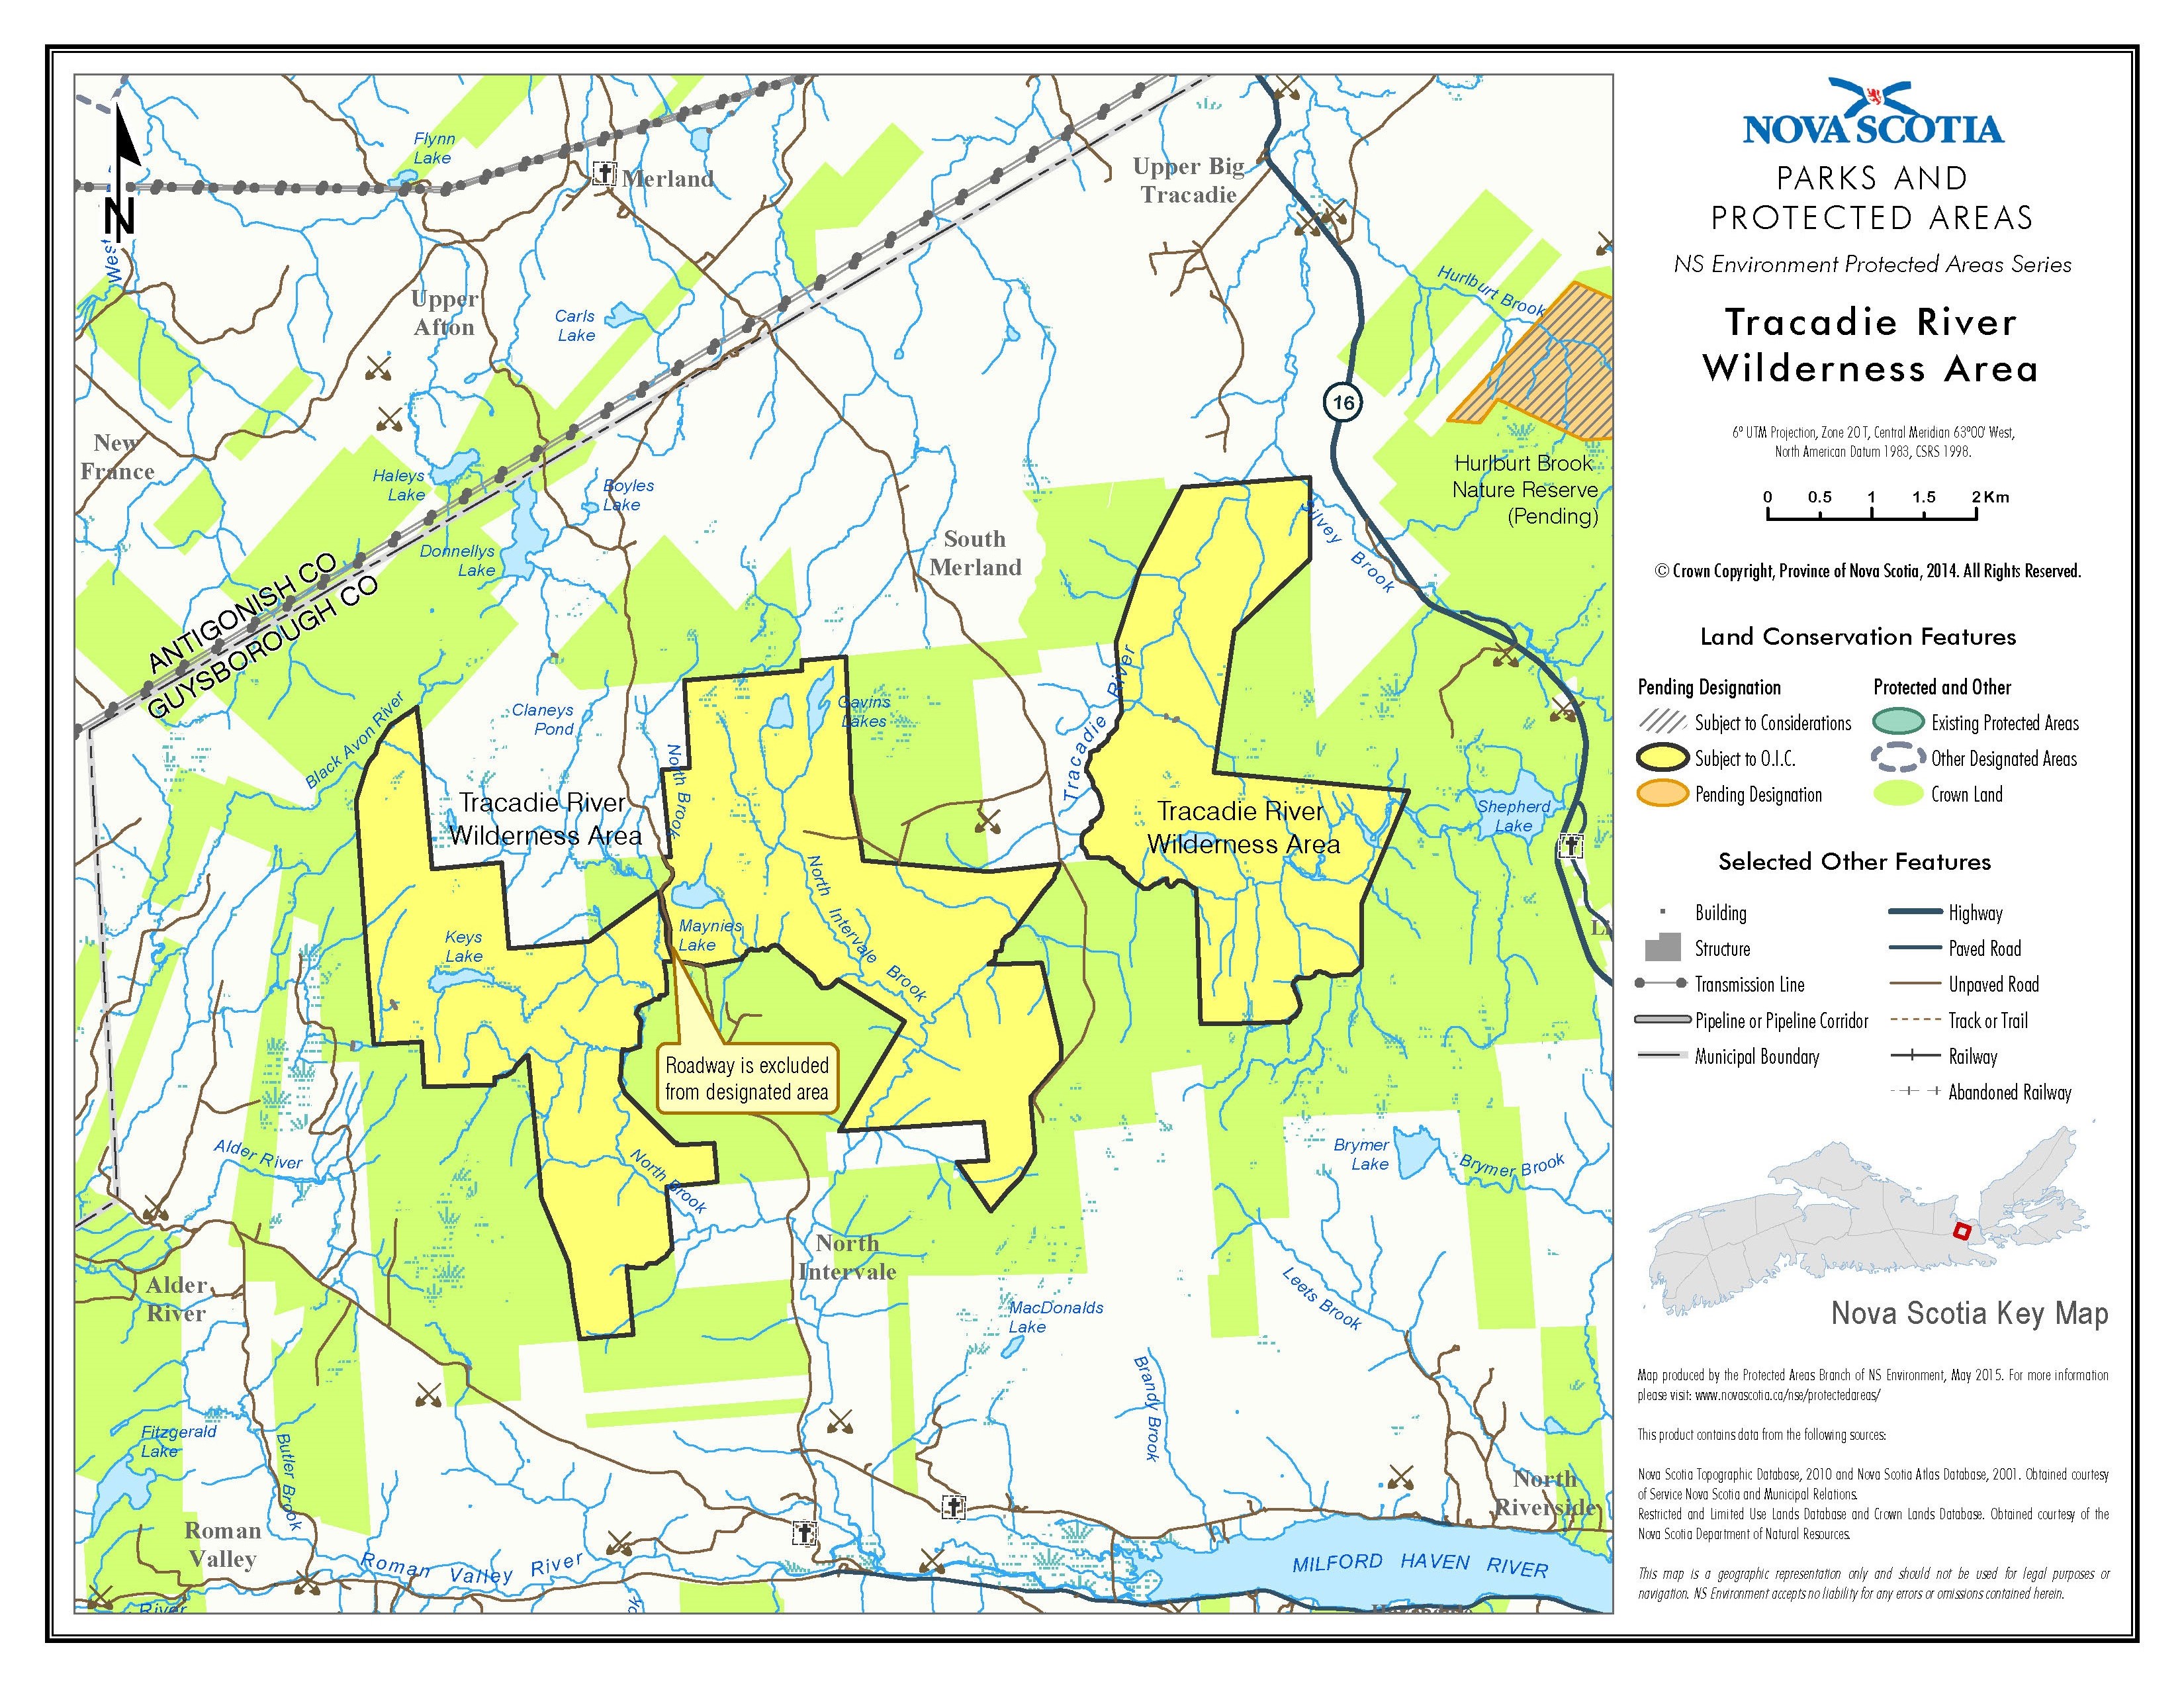 Approximate boundaries of Tracadie River Wilderness Area